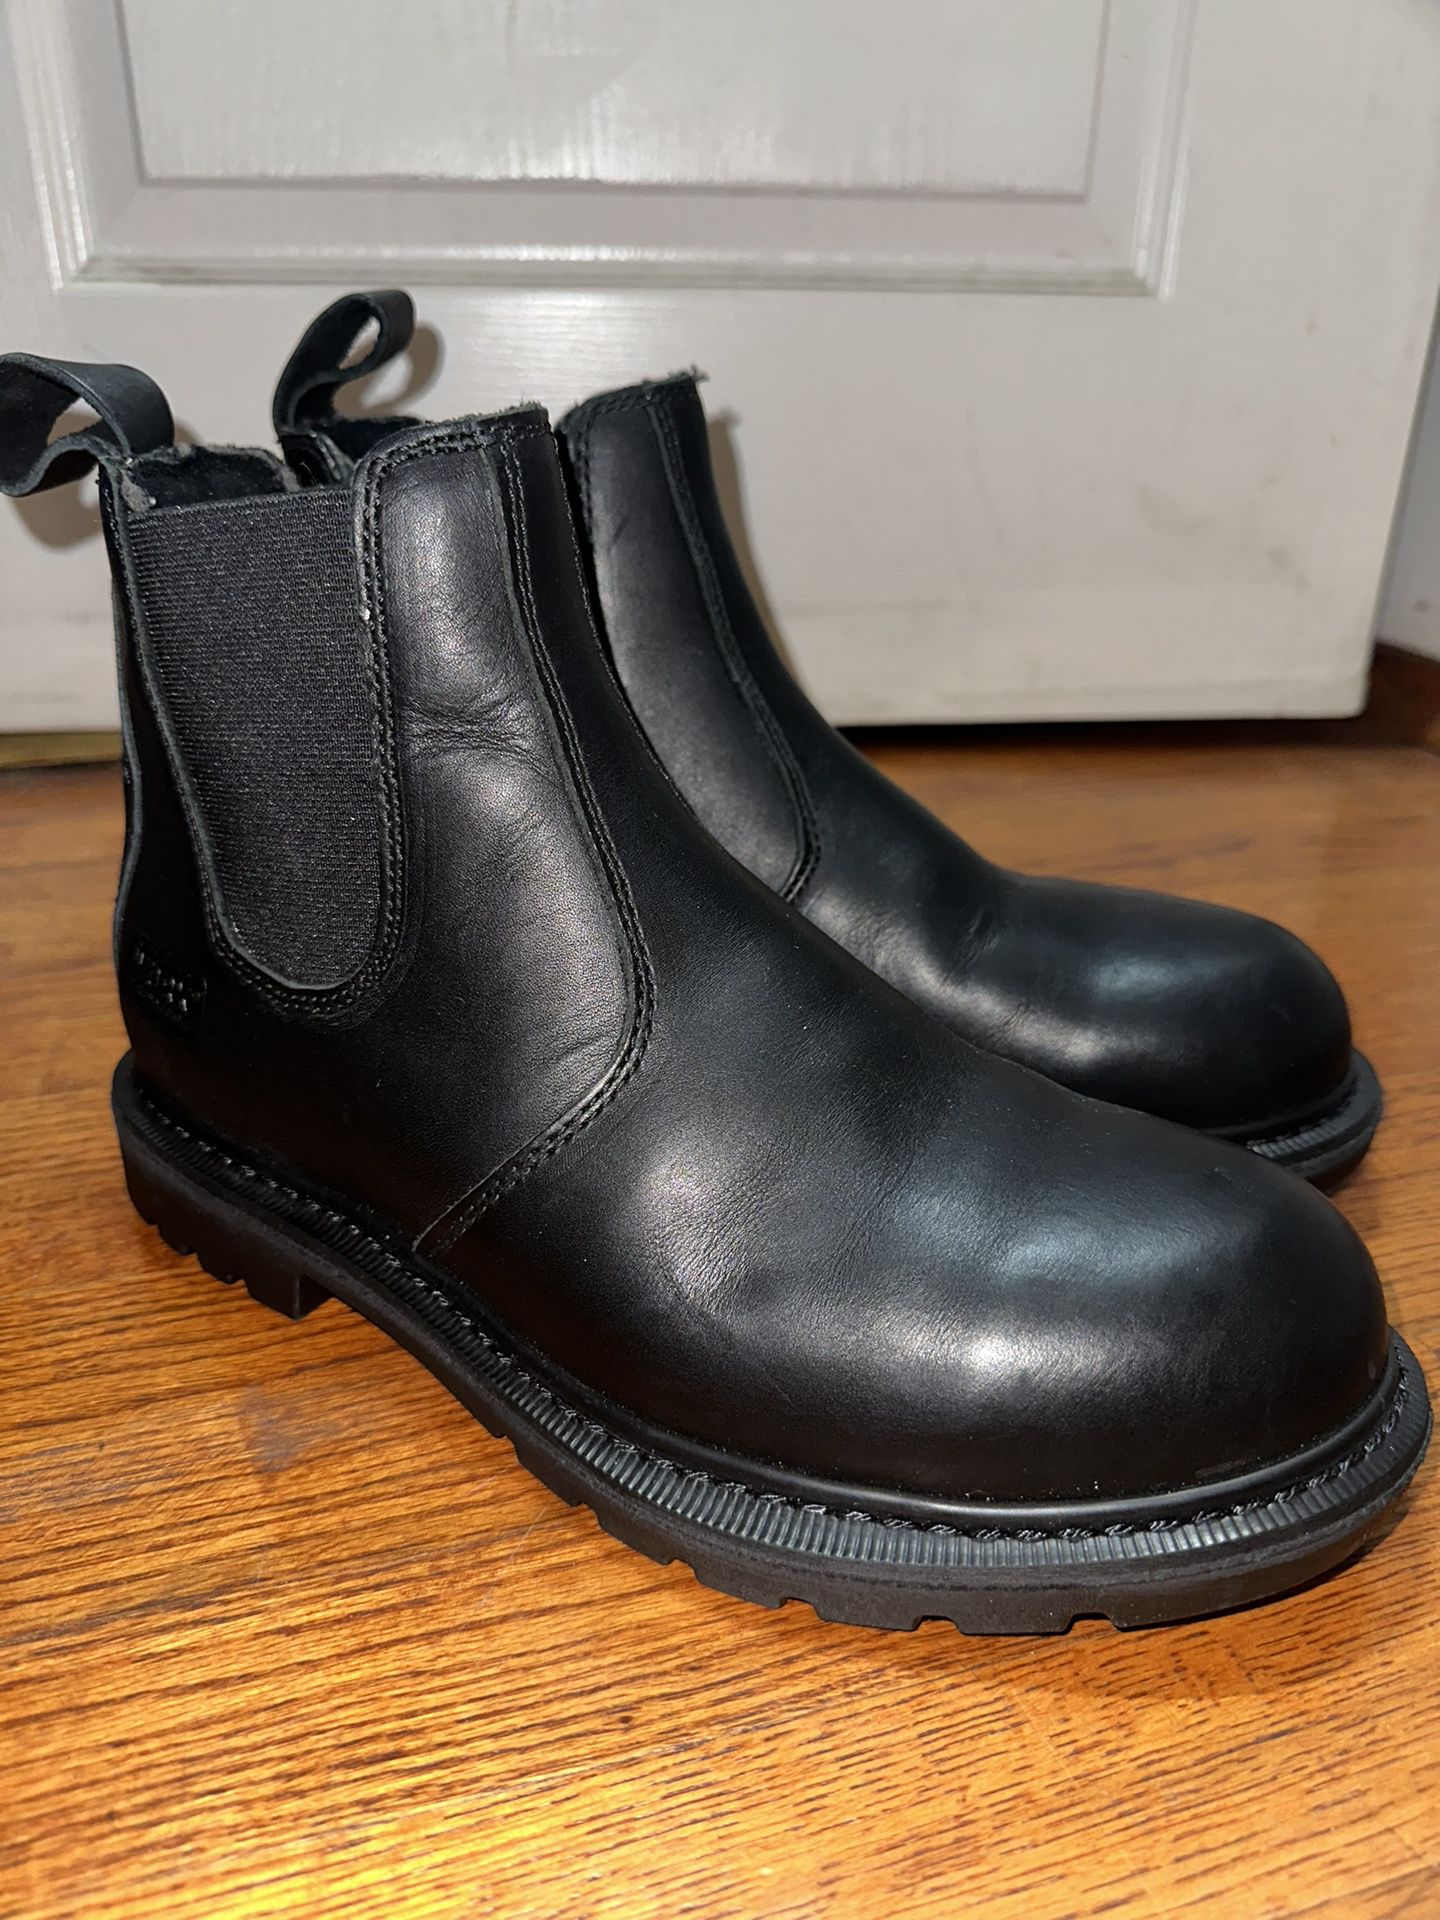 RED WING WORX STYLE BOOTS